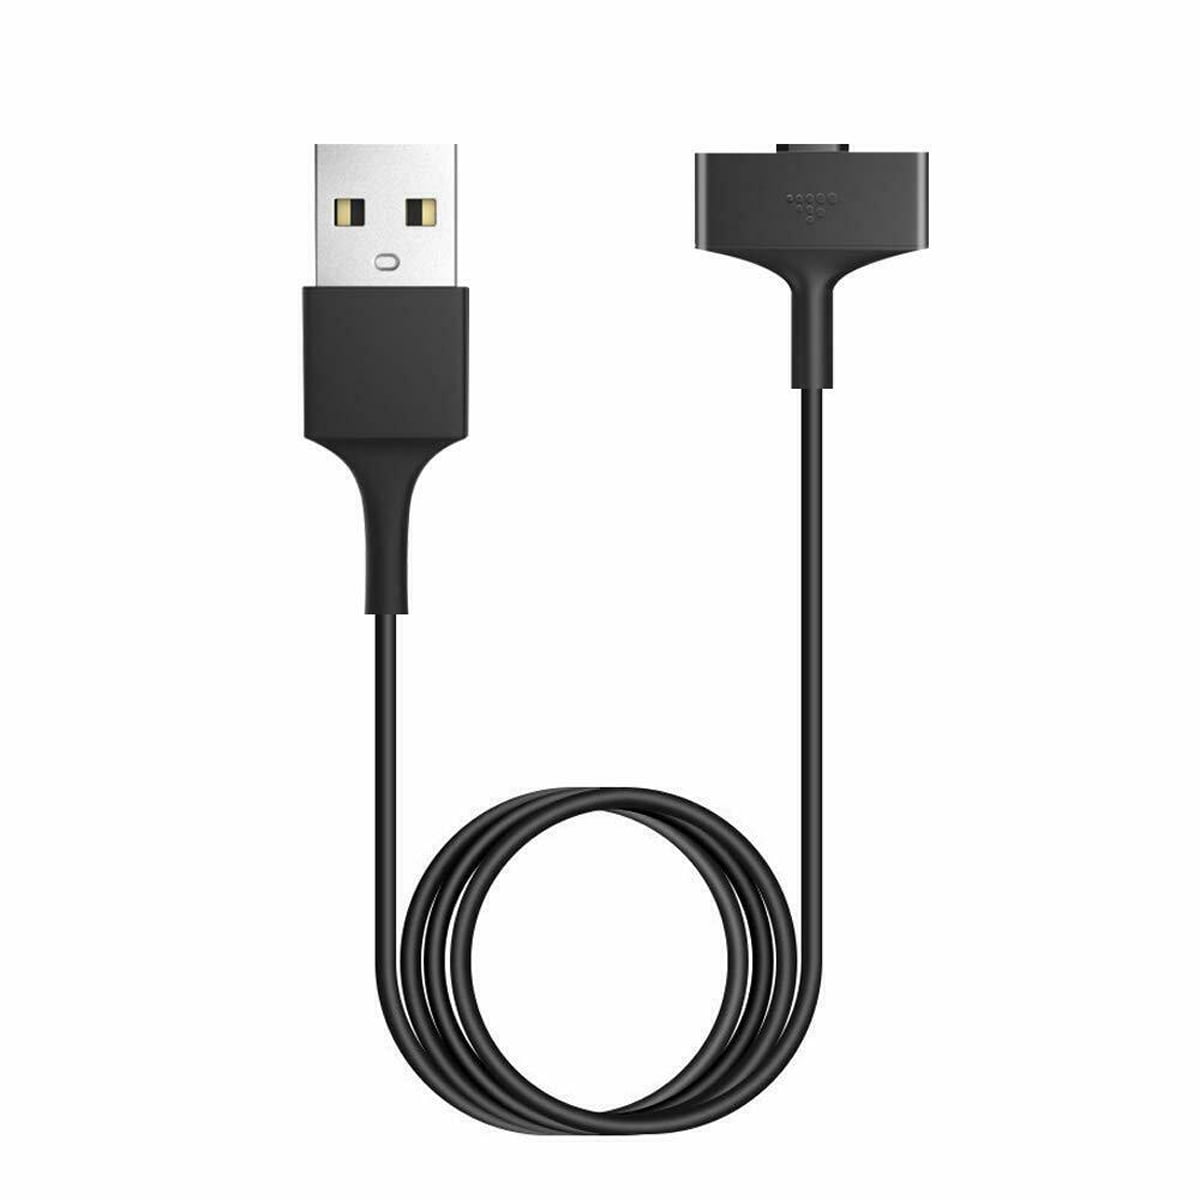 2 Pcs Replacement Smartwatch USB Charger Charging Cable Adapter for Fitbit Ionic 